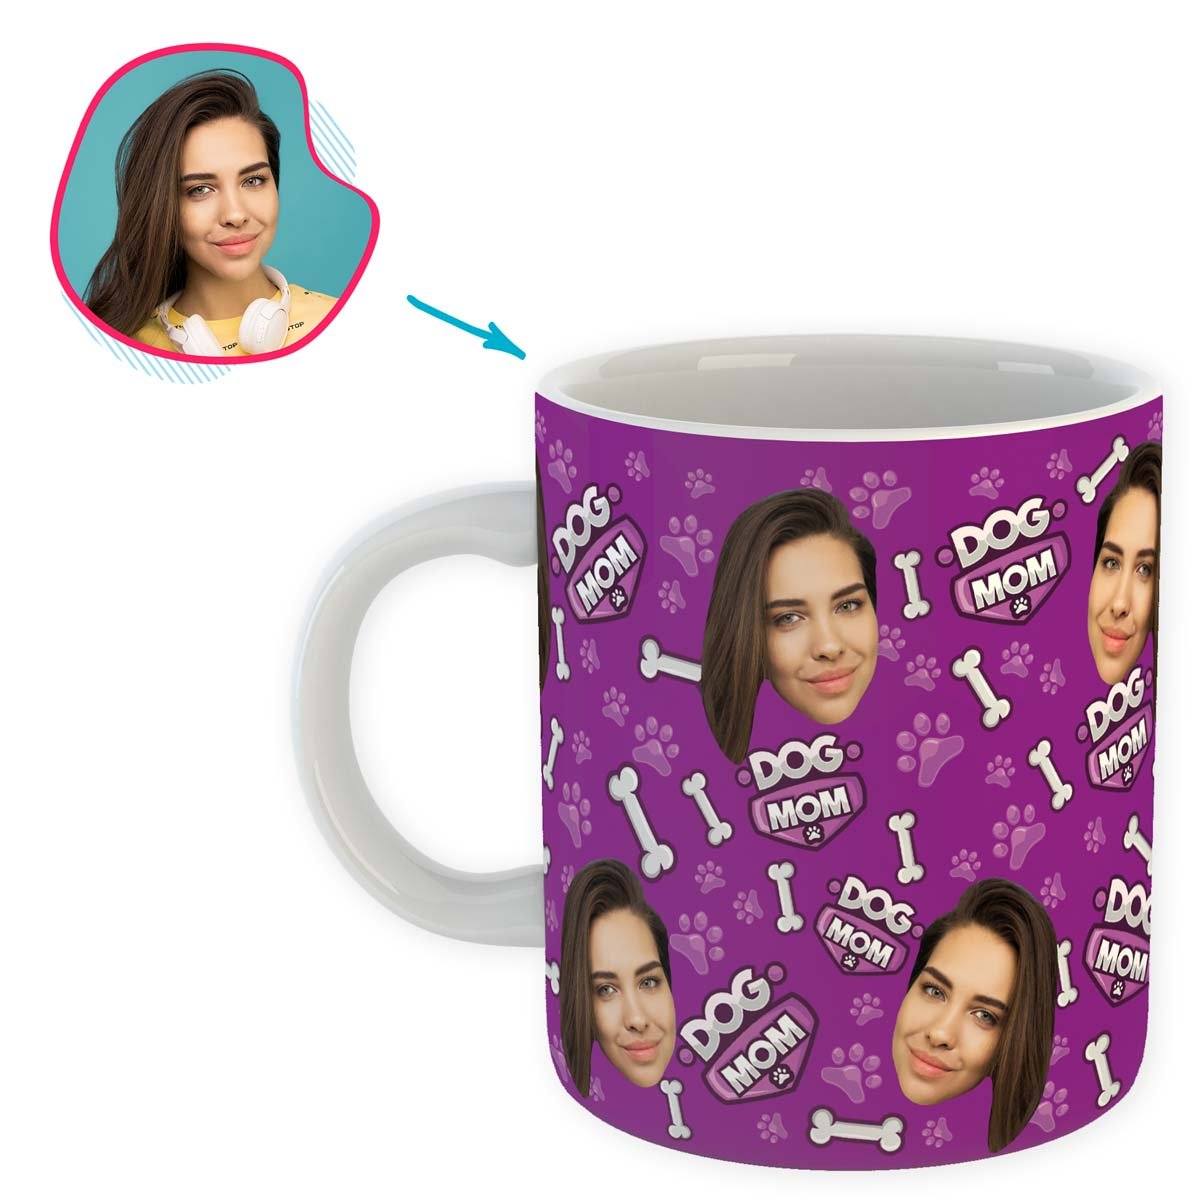 purple Dog Mom mug personalized with photo of face printed on it